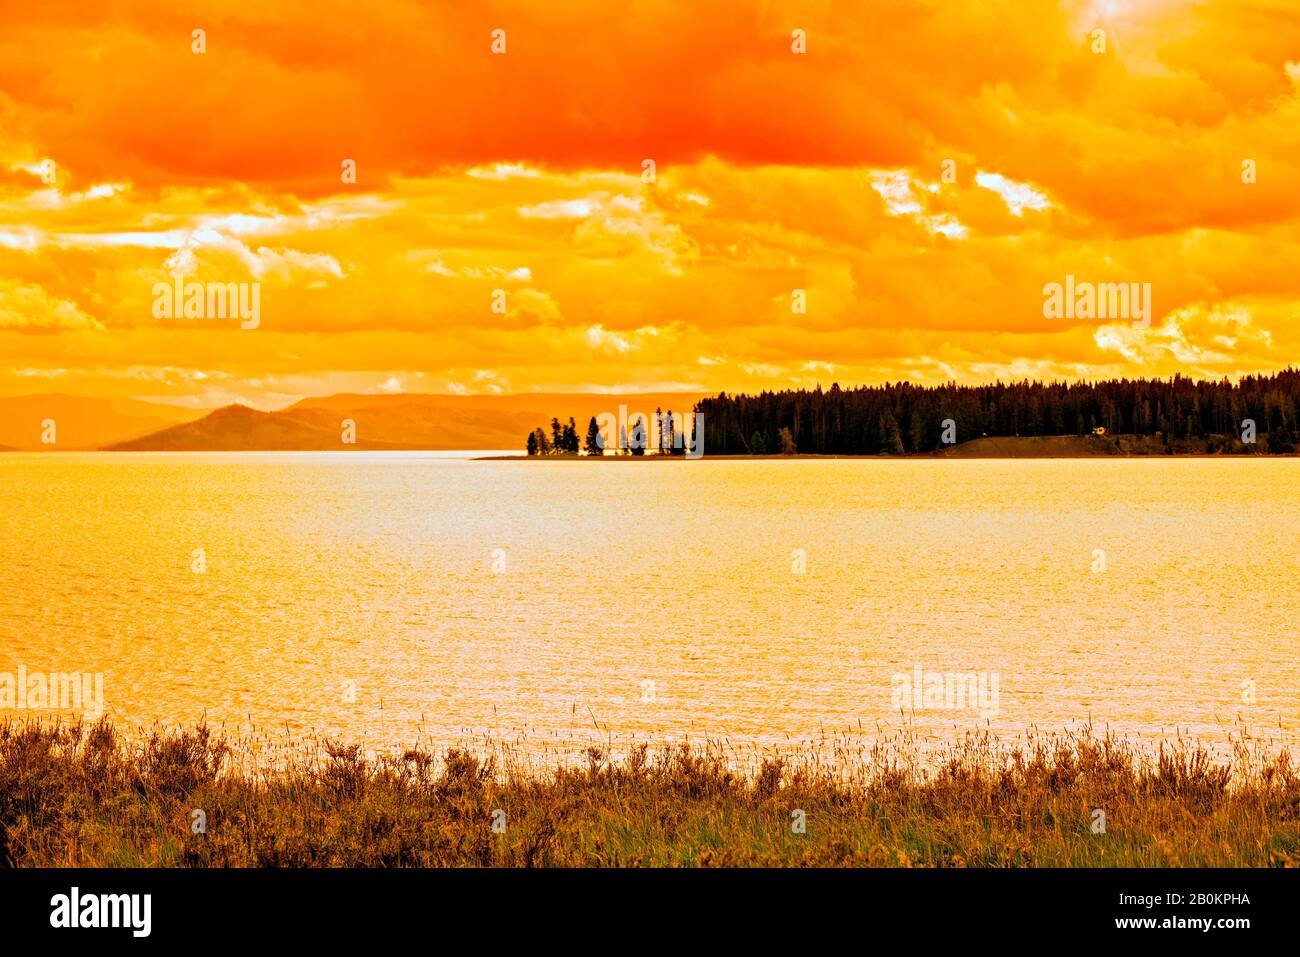 Amber light fills the cloudy sky and lake. A warm peaceful feeling. Stock Photo